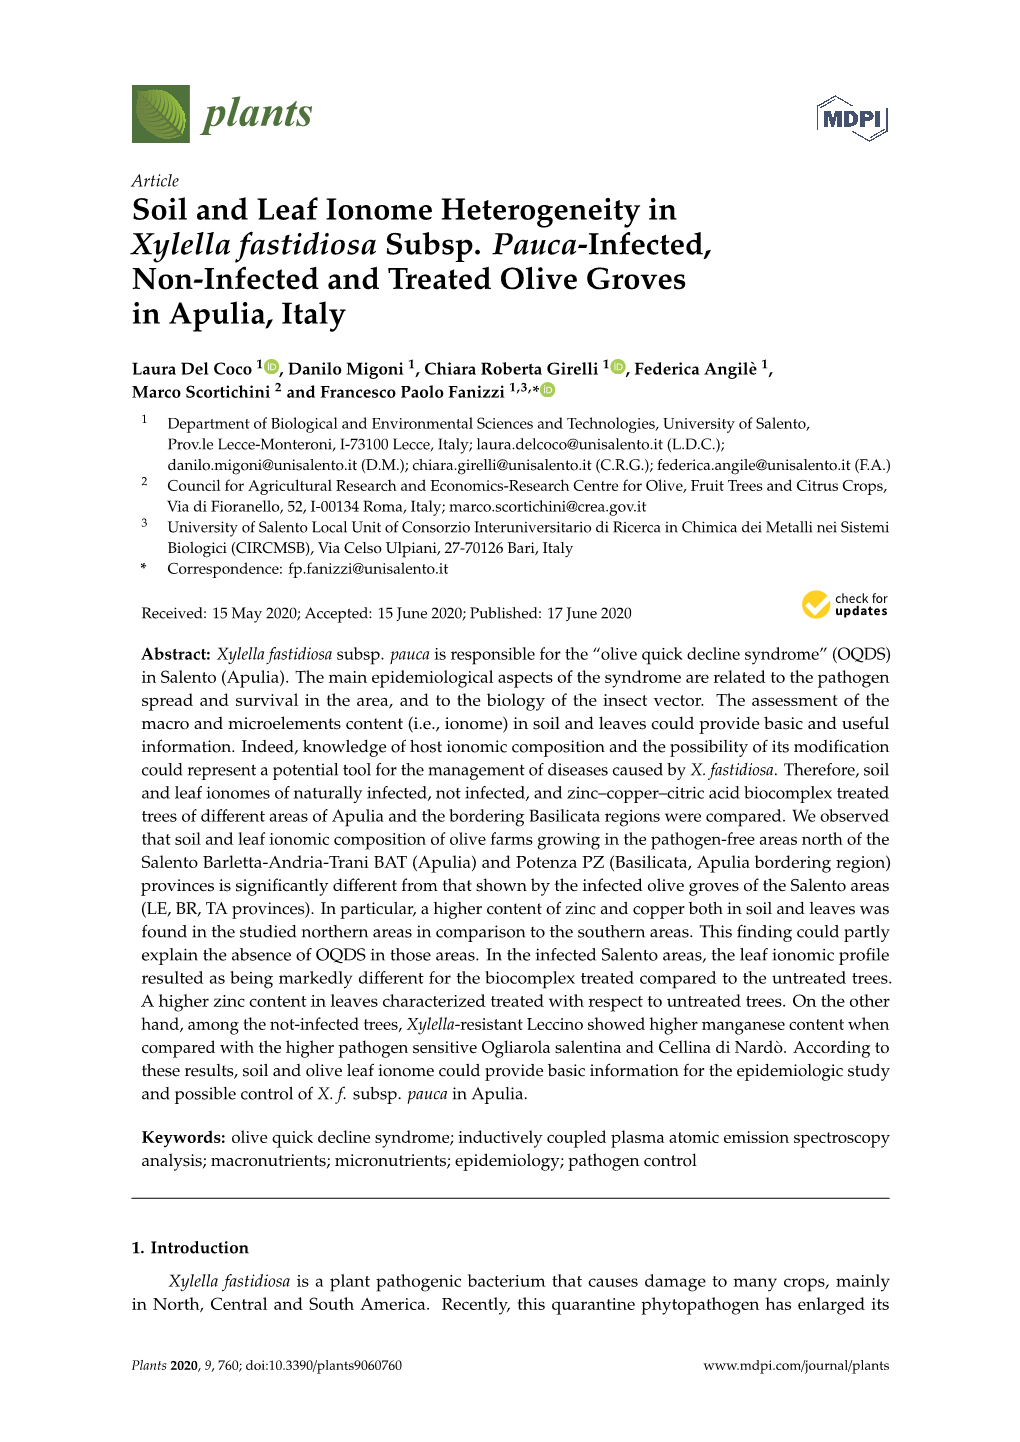 Soil and Leaf Ionome Heterogeneity in Xylella Fastidiosa Subsp. Pauca-Infected, Non-Infected and Treated Olive Groves in Apulia, Italy